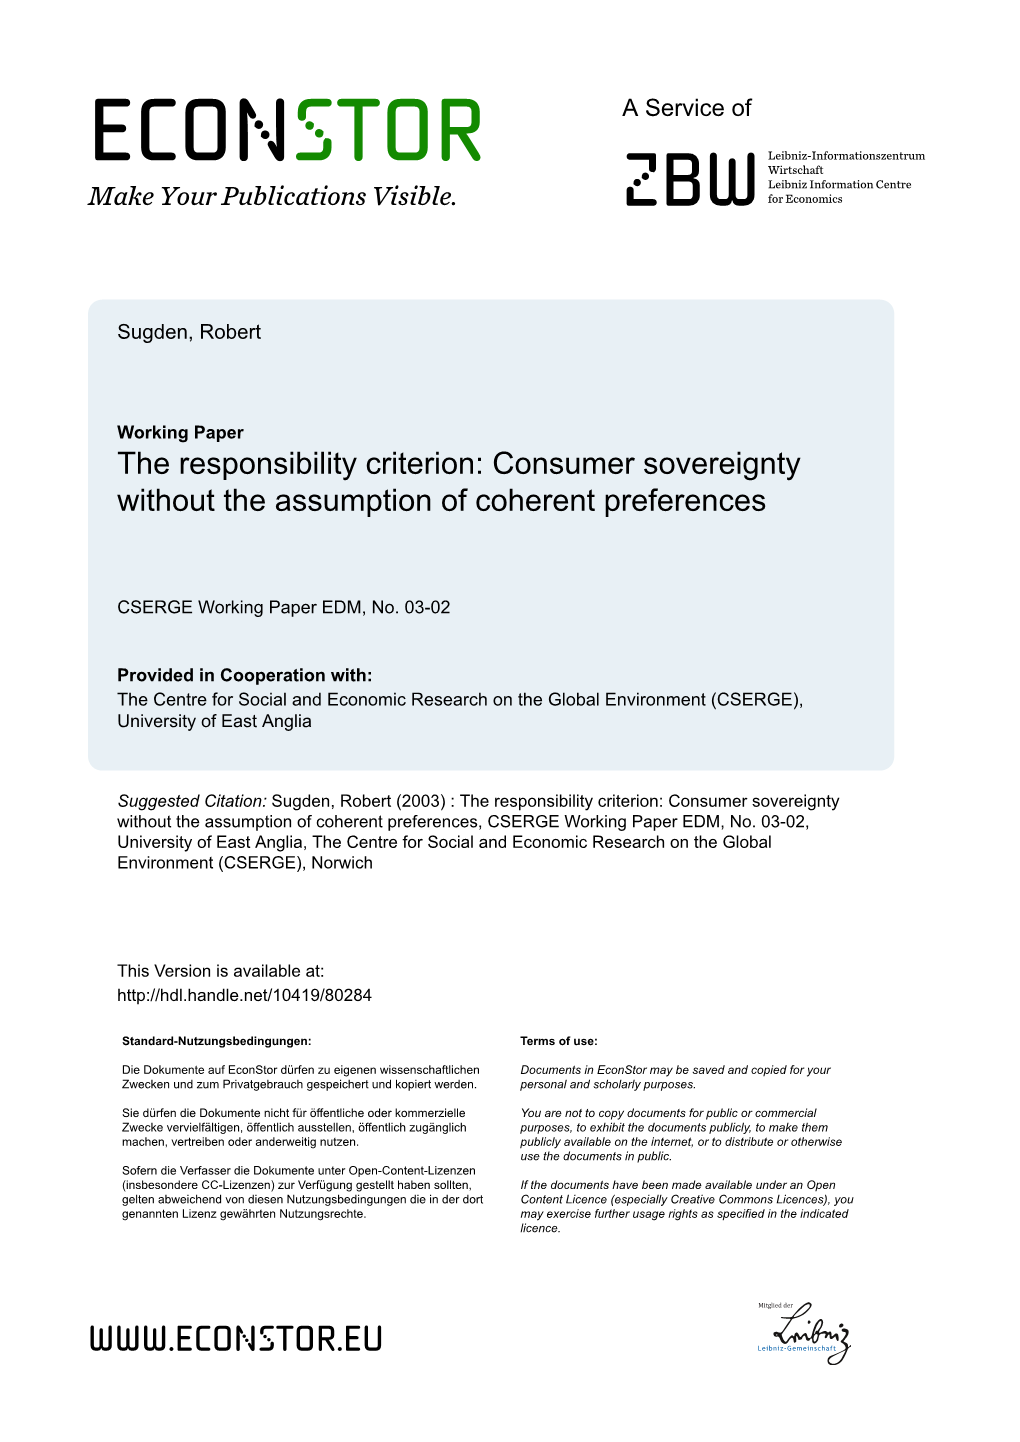 The Responsibility Criterion: Consumer Sovereignty Without the Assumption of Coherent Preferences